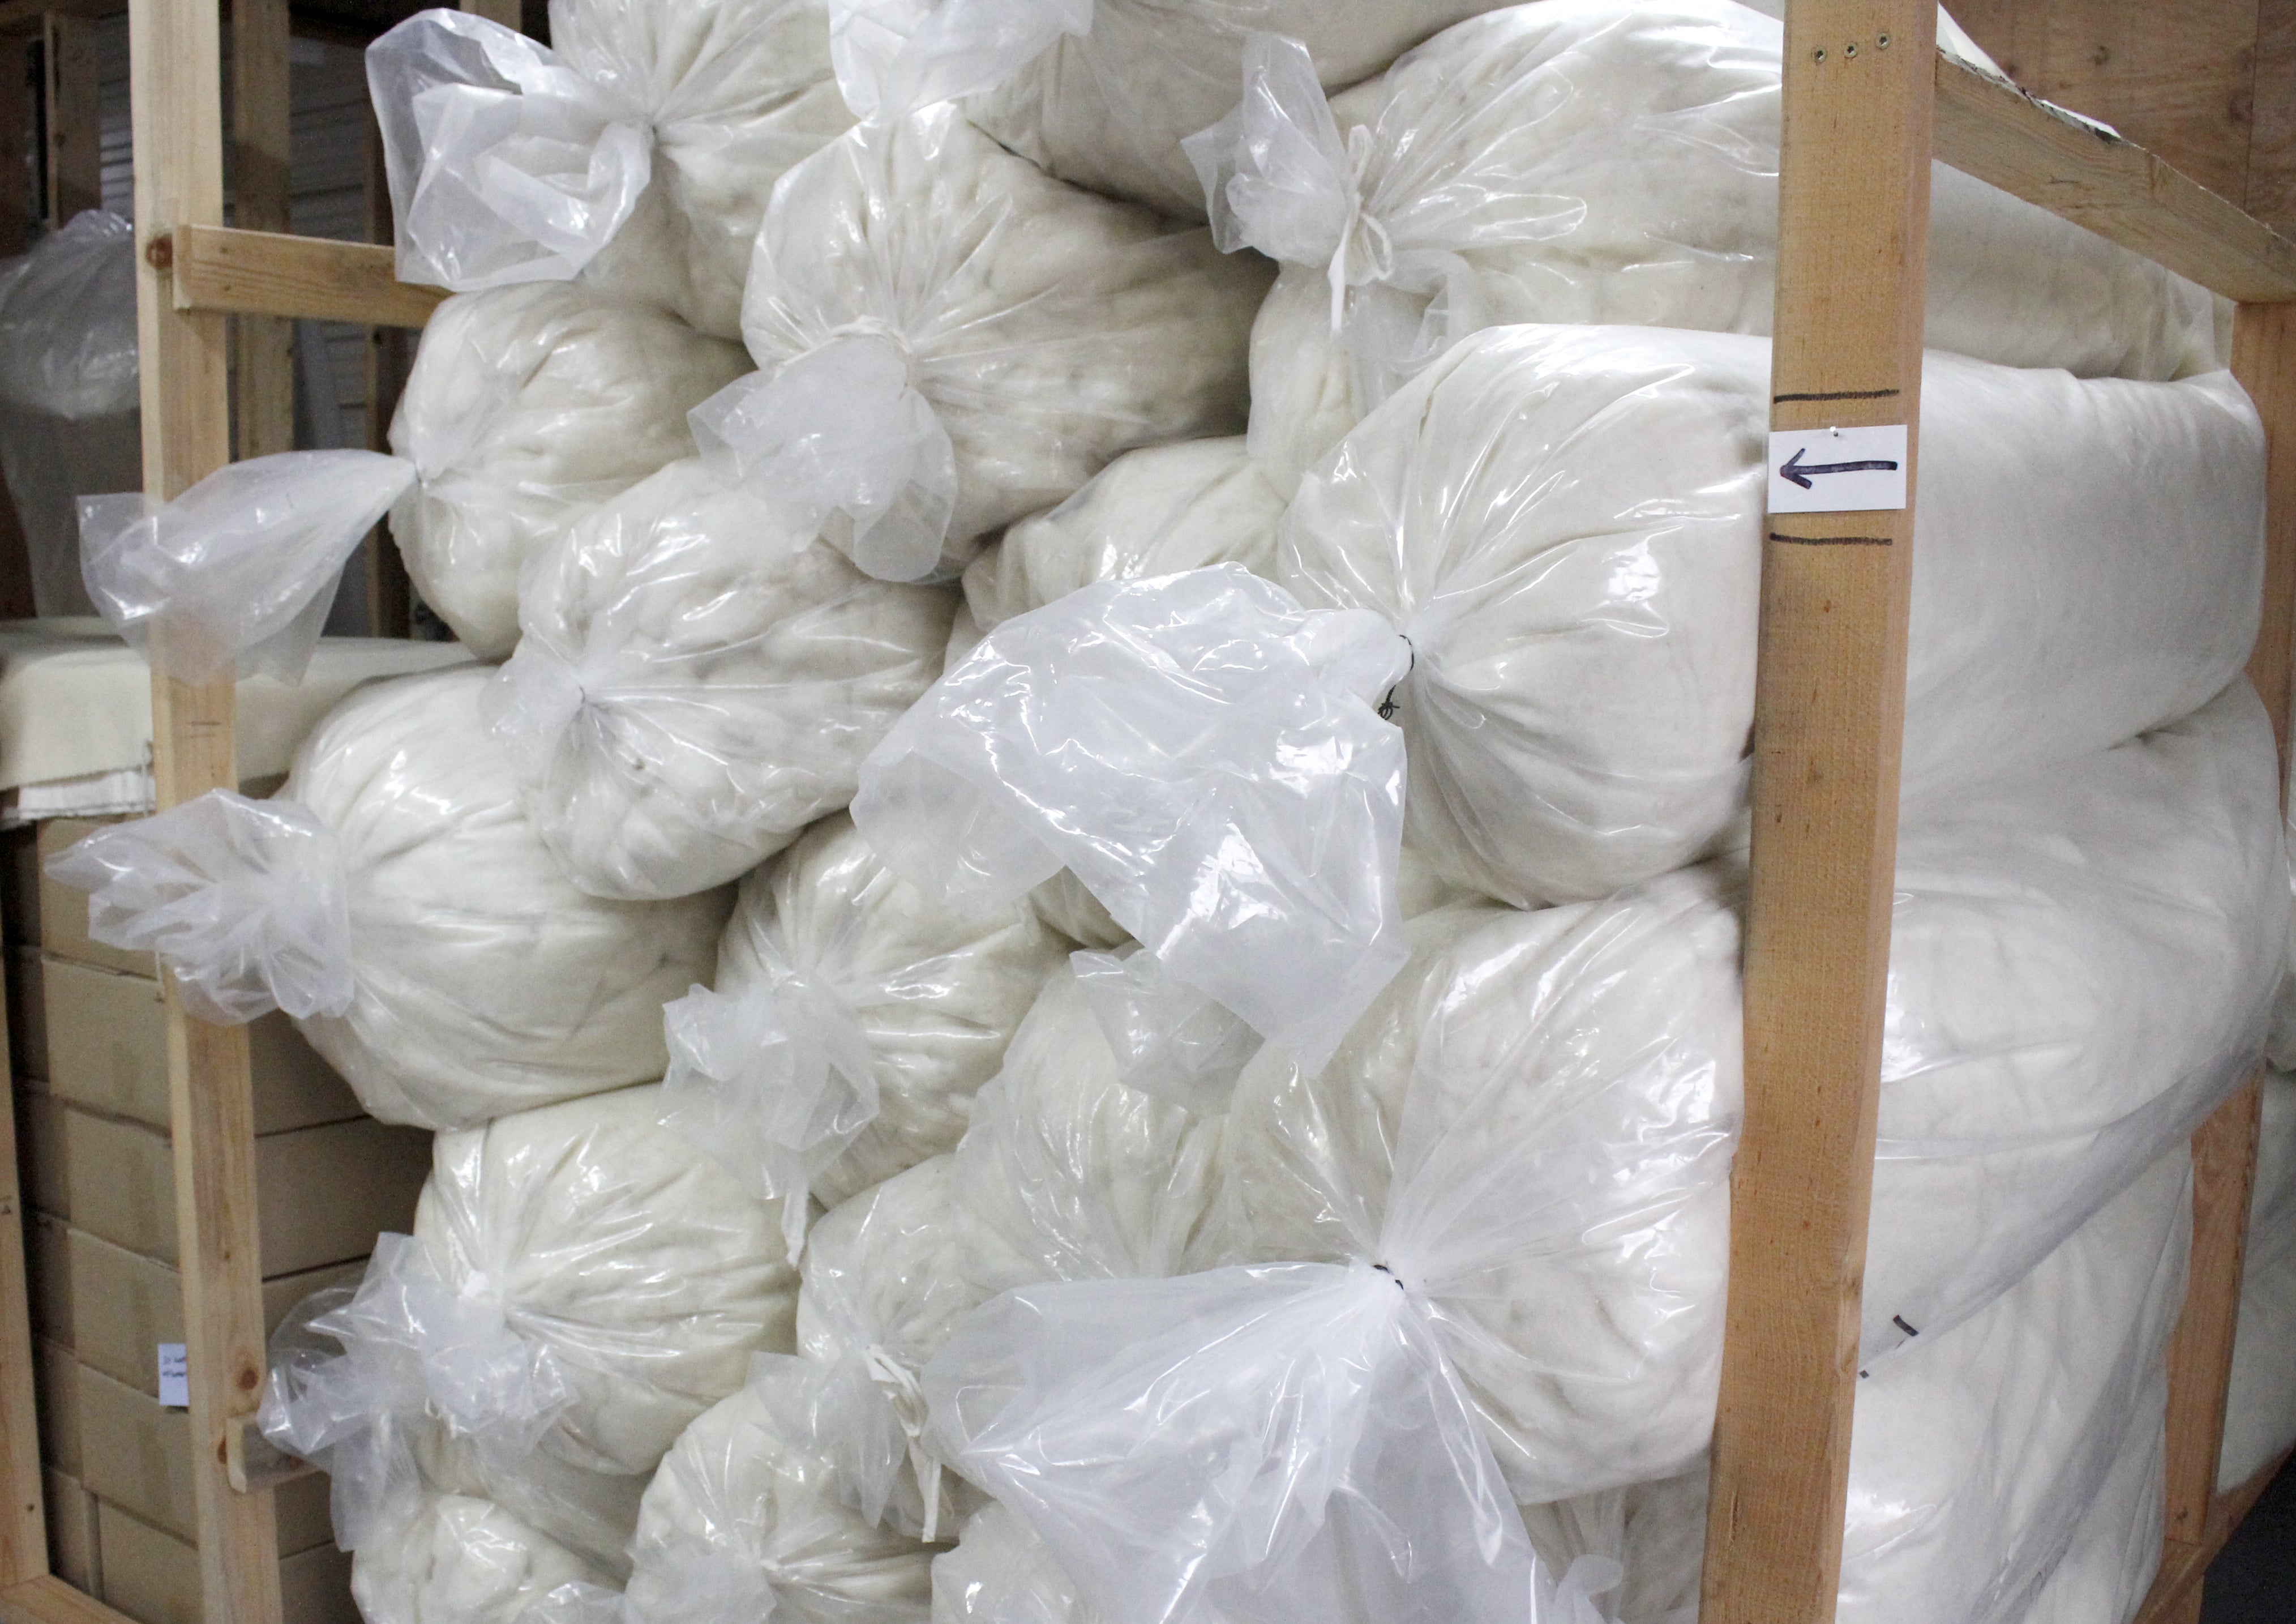 Wool shipment from the Mill